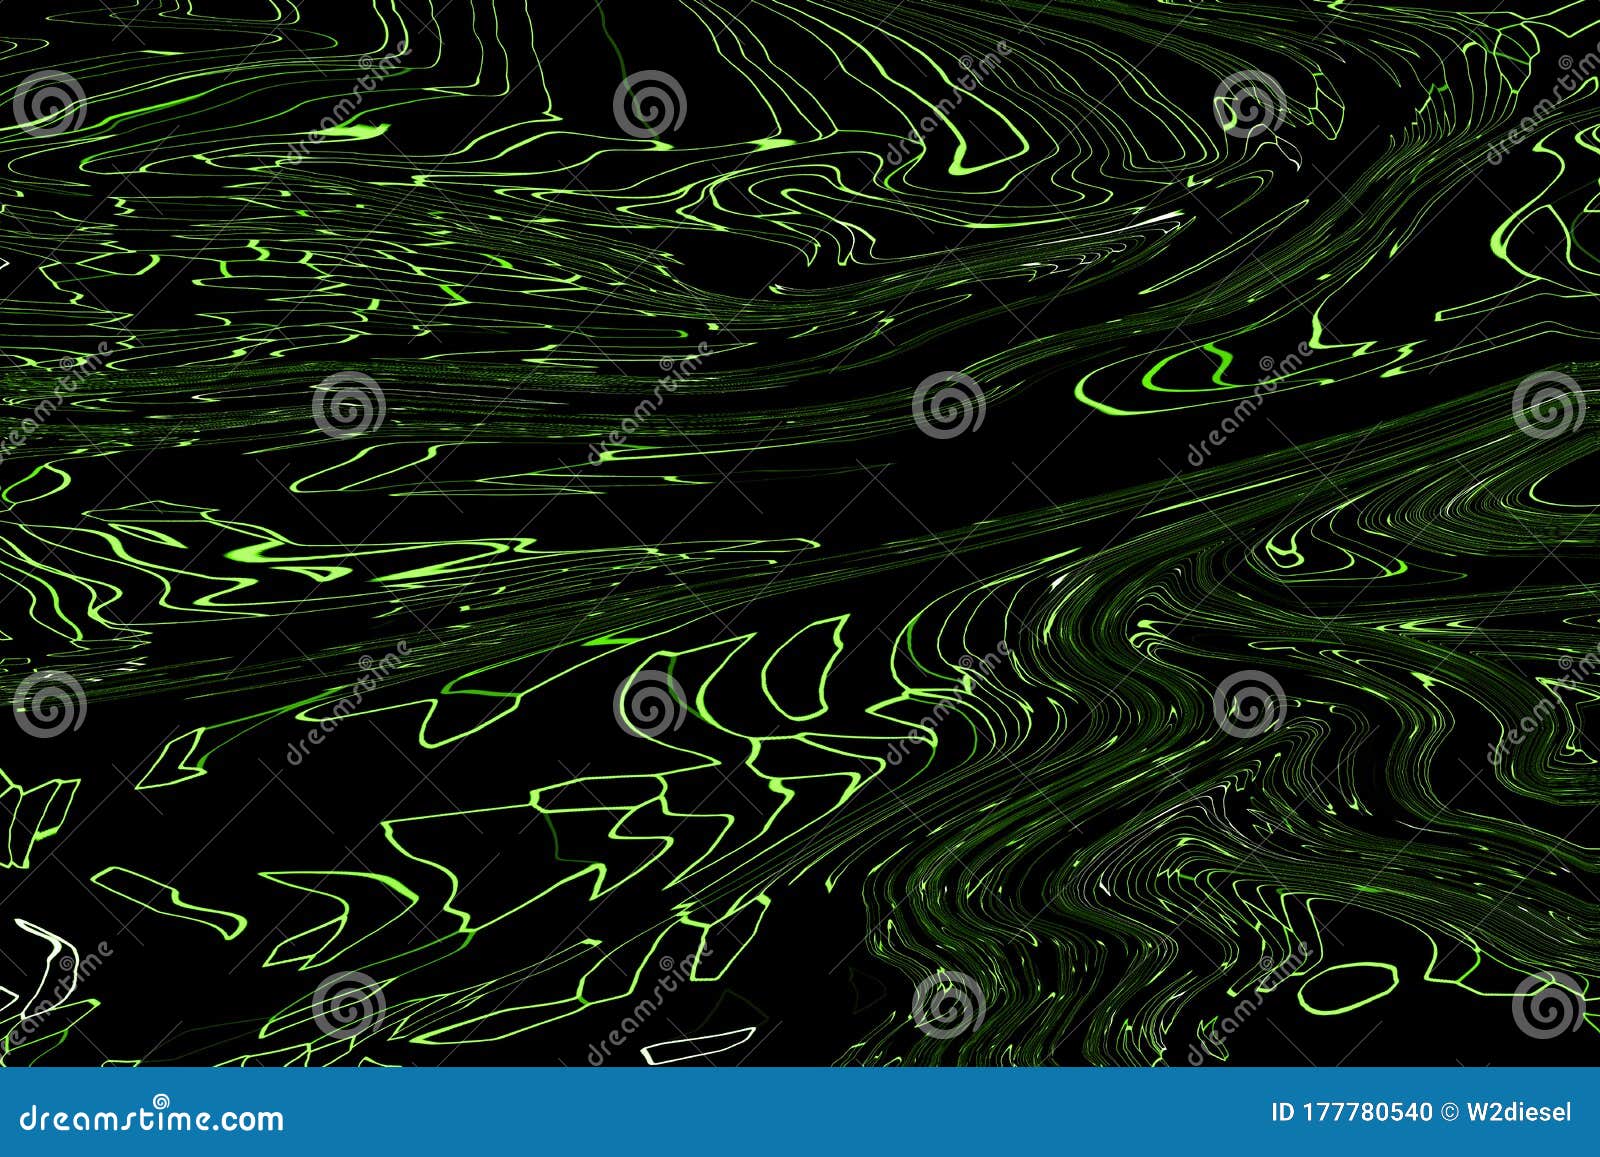 perfect green 3d abstract desigh